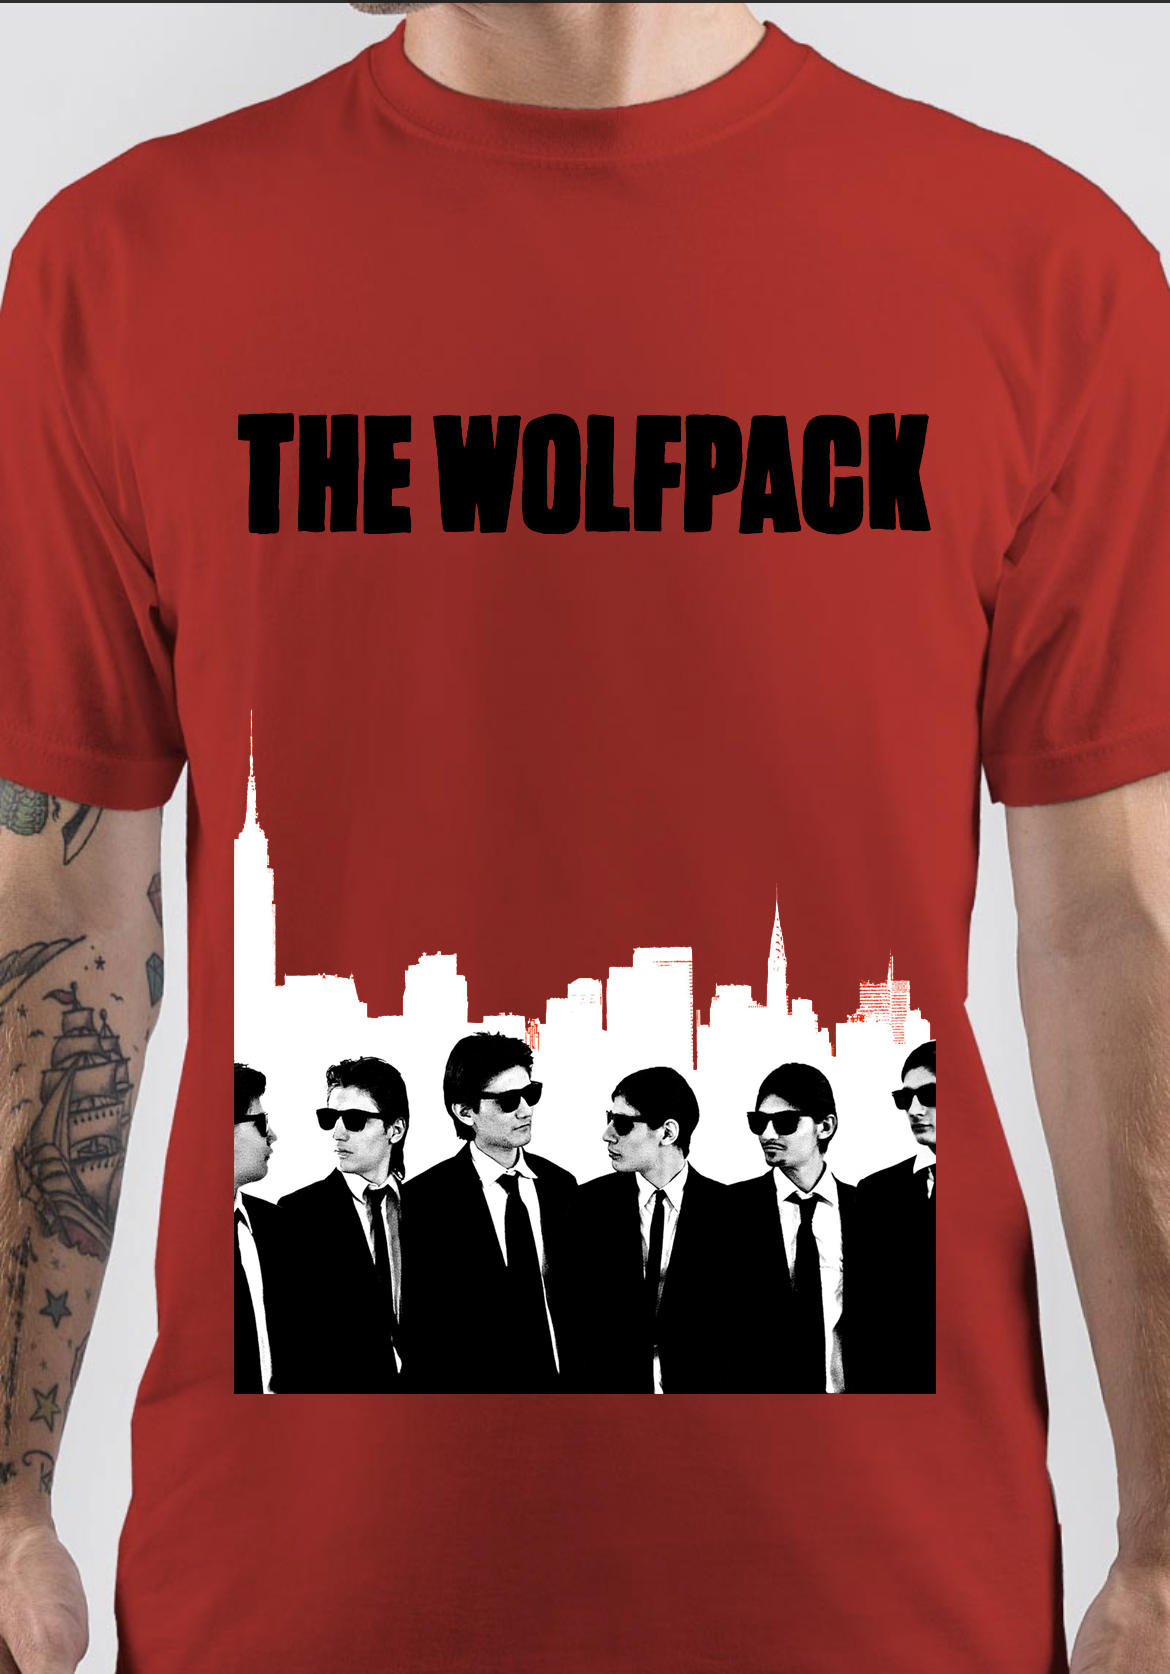 The Wolfpack T-Shirt And Merchandise